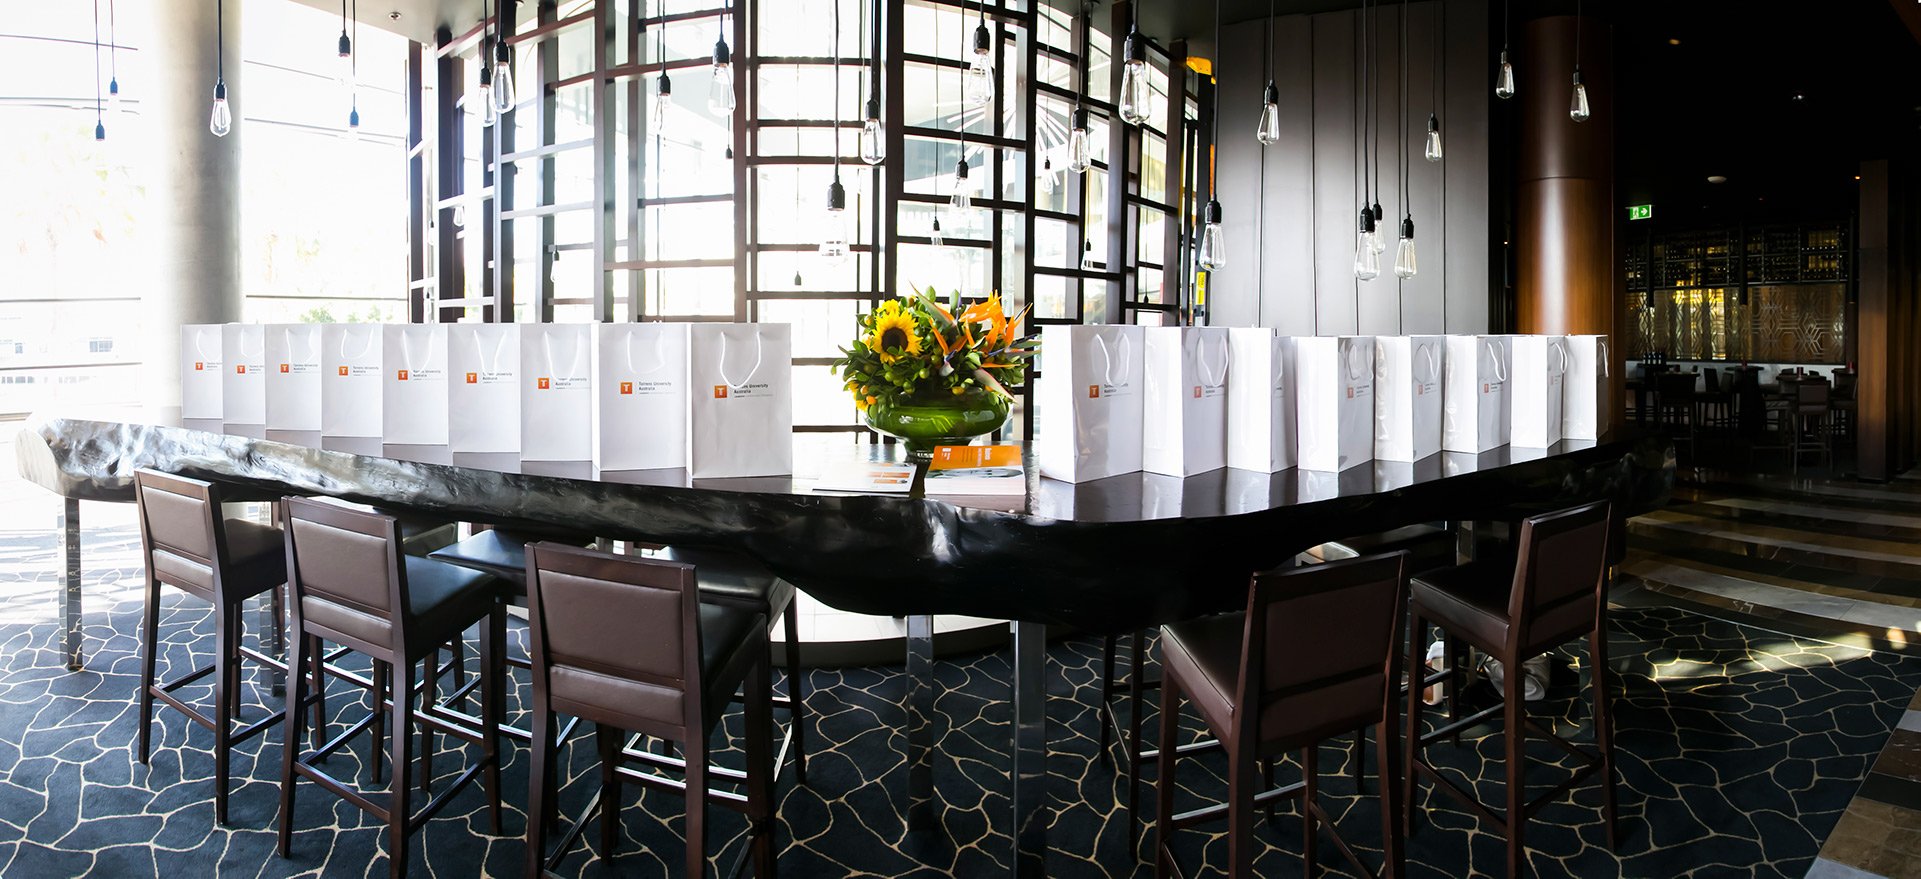  branded gift bags displayed on restaurant bar sydney kirsten cox photographer events 